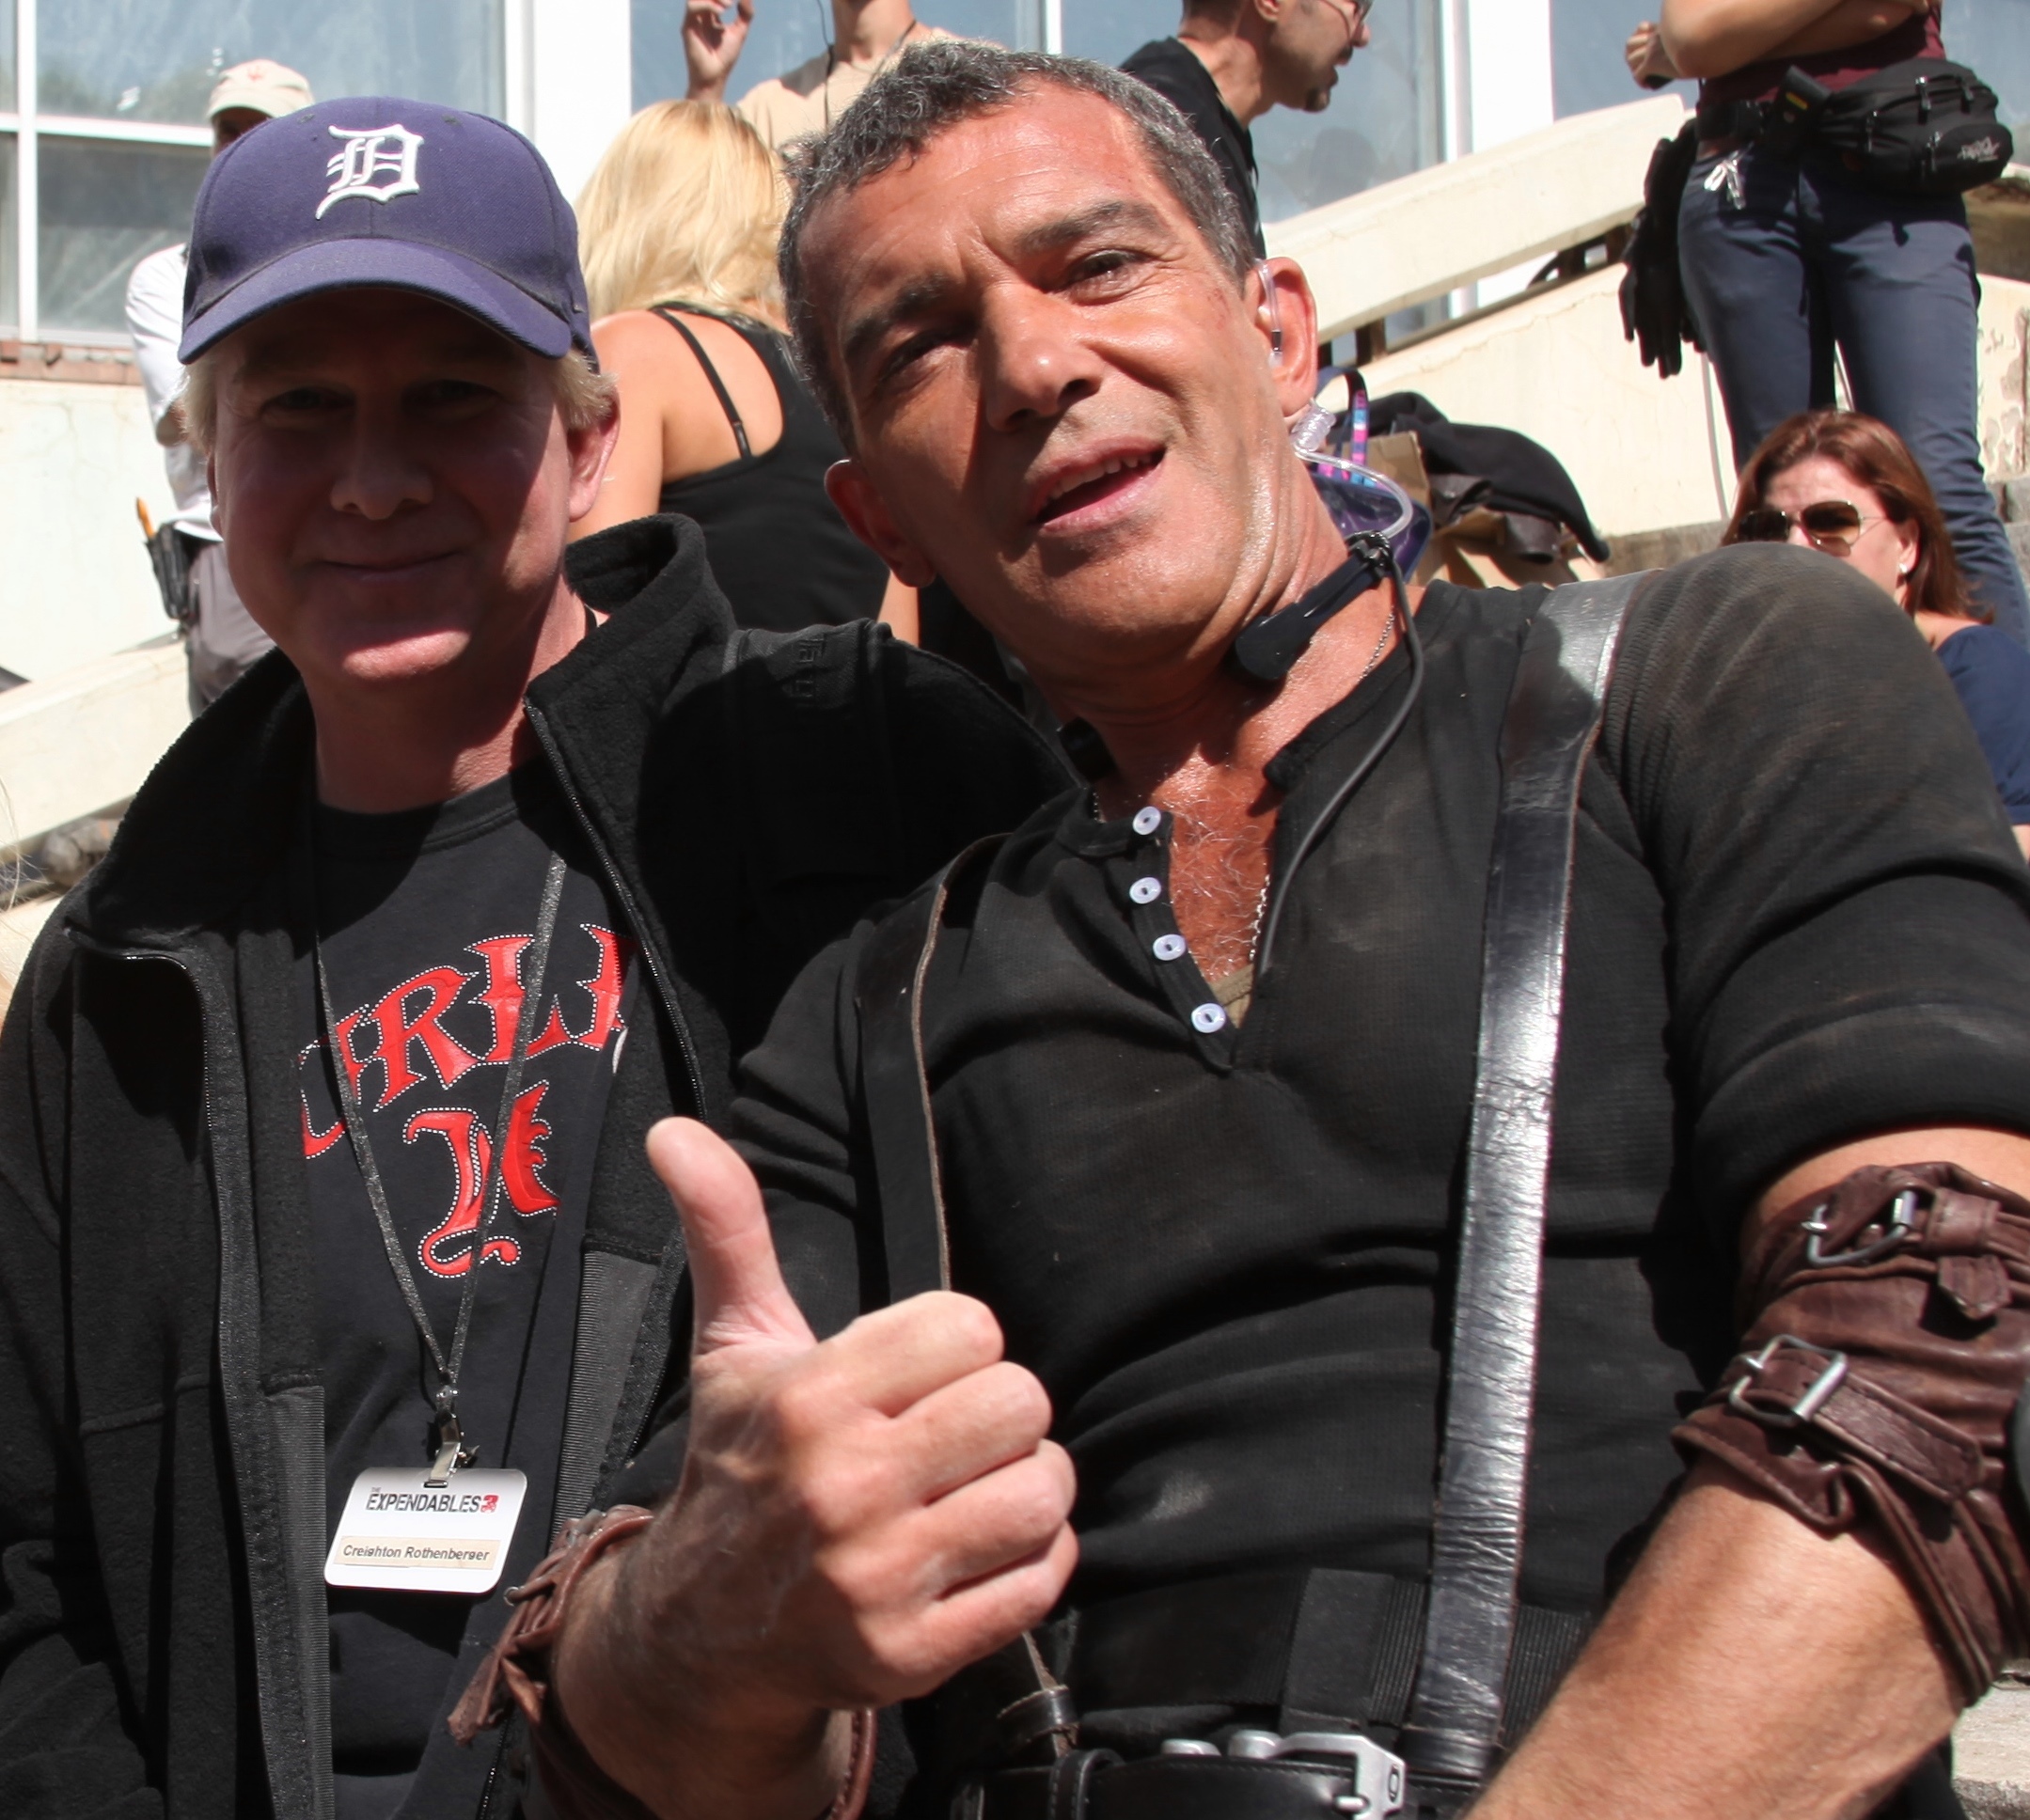 Creighton Rothenberger and Antonio Banderas during filming of The Expendables 3 - Sofia, Bulgaria (2013)